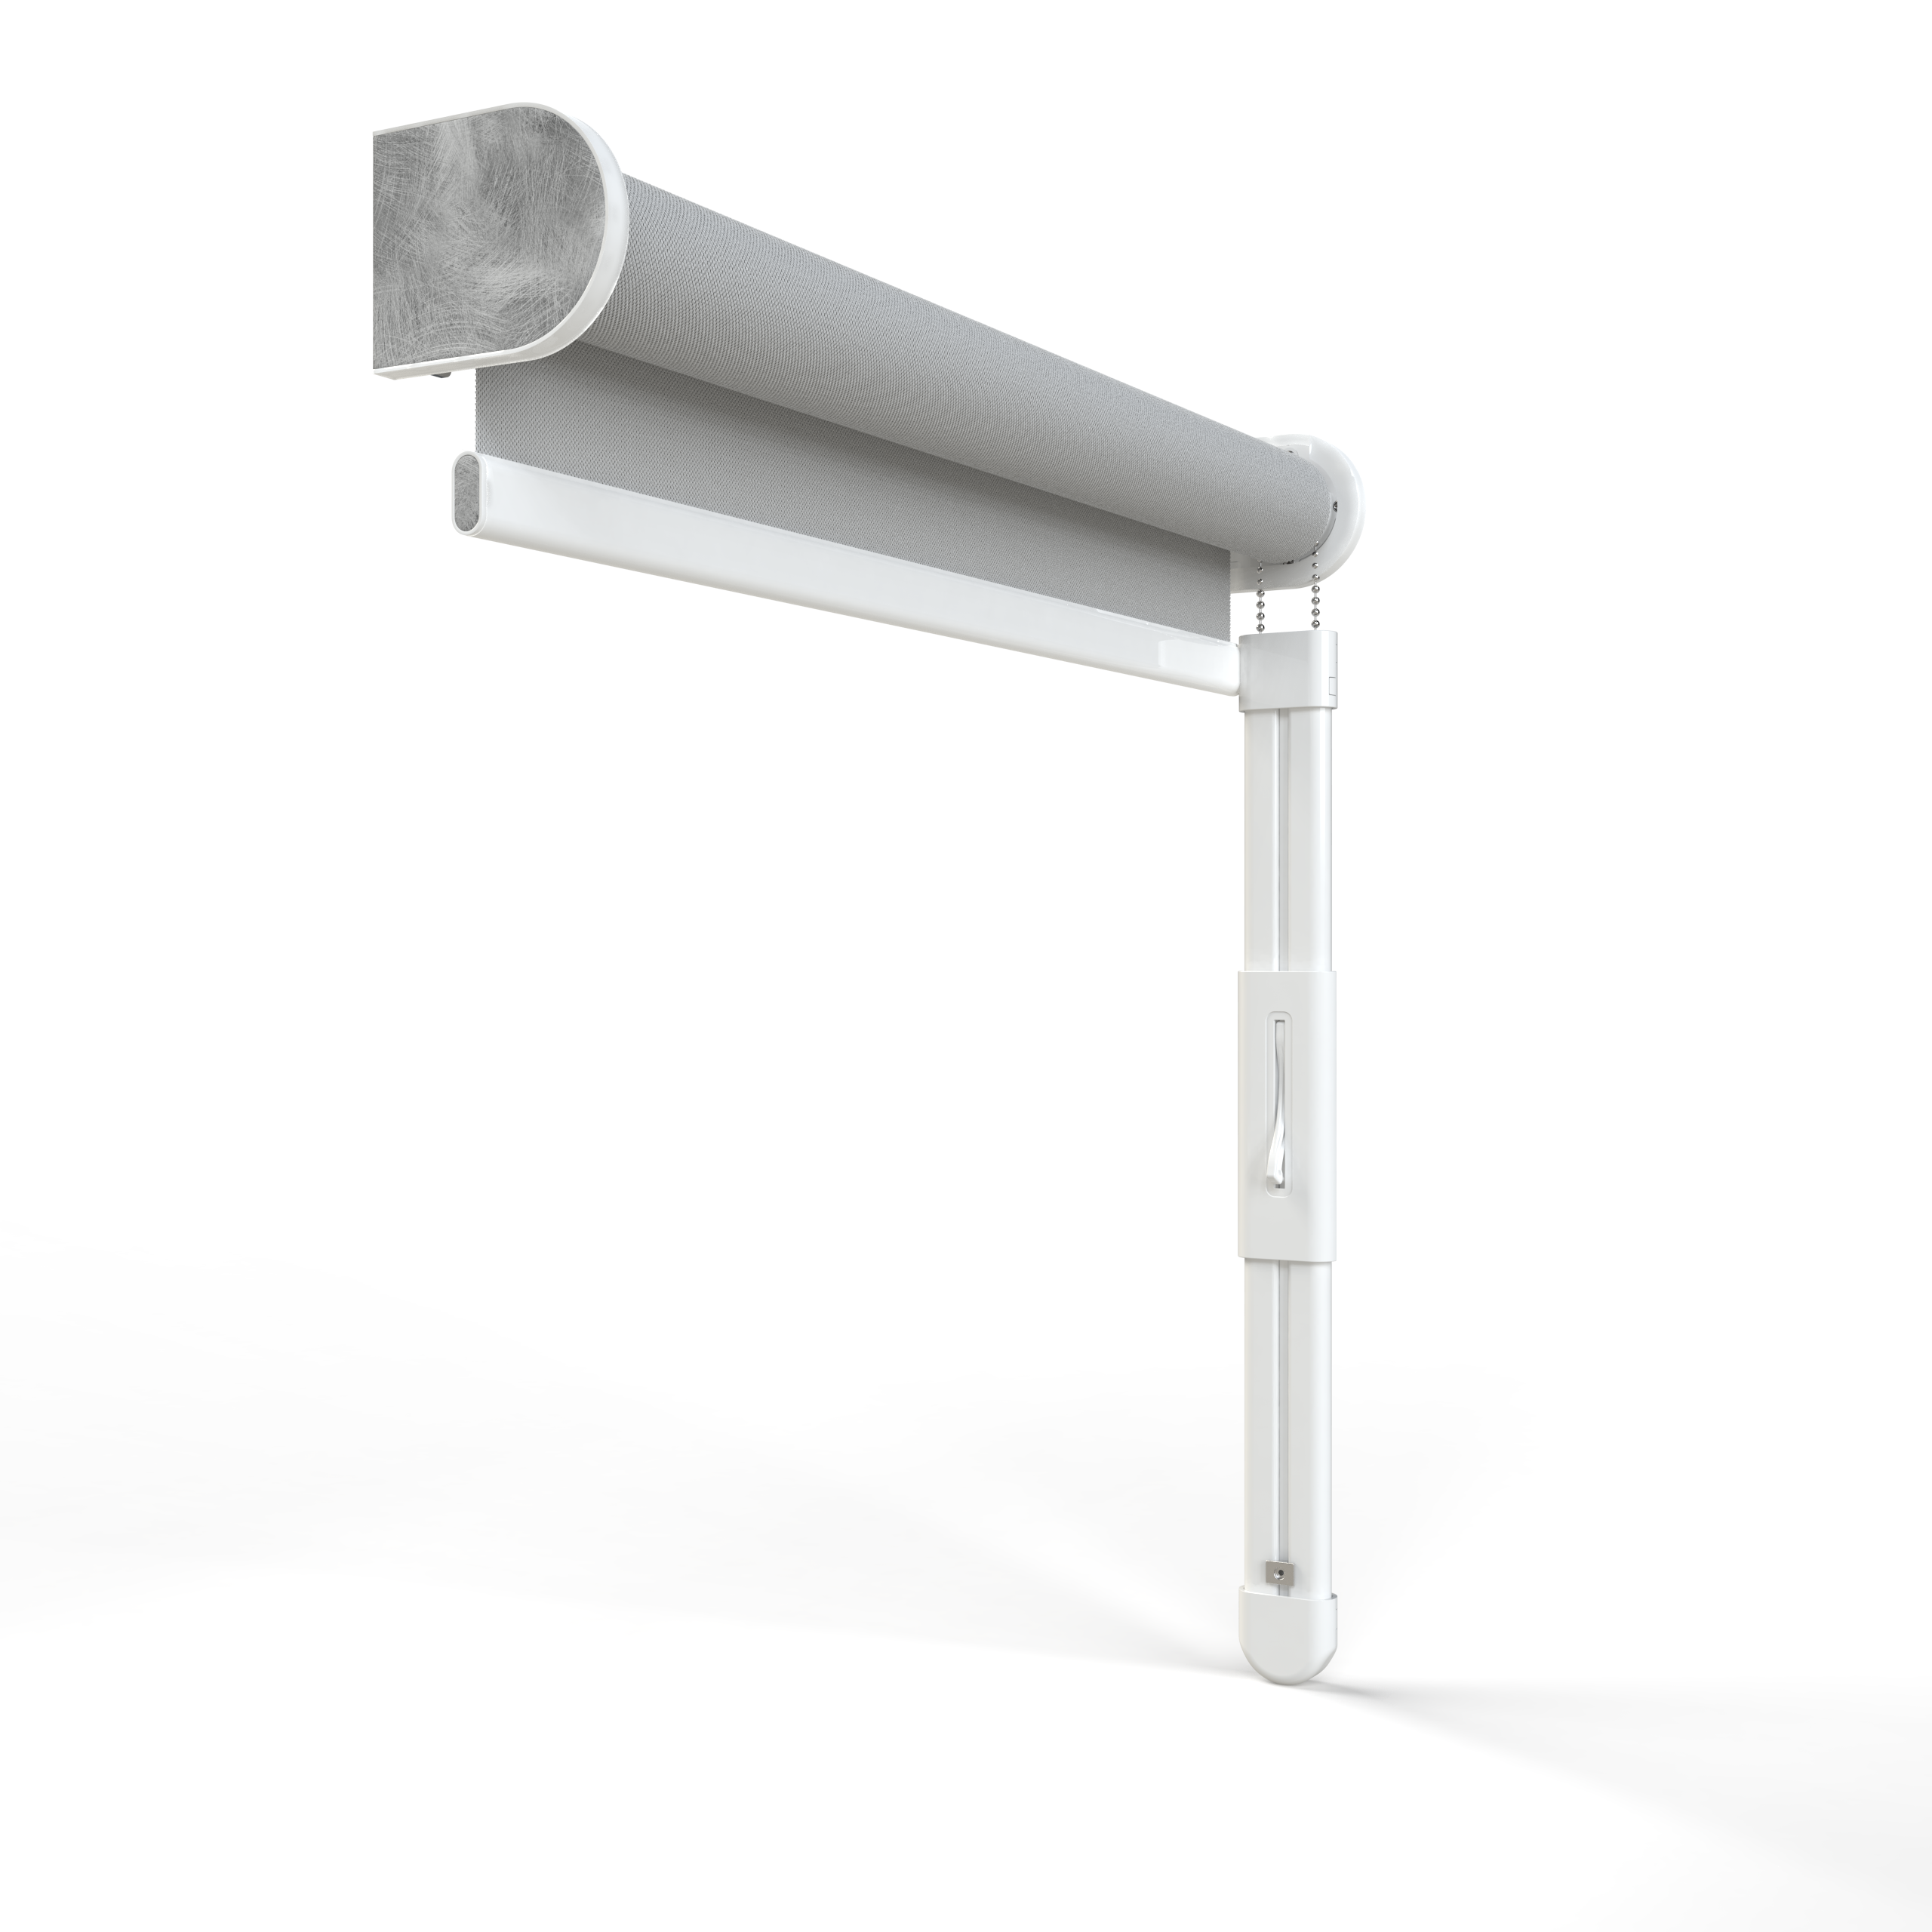 Legrand Shading Systems Announces Cord Keeper for Safe, Compliant Chain-Operated Shades